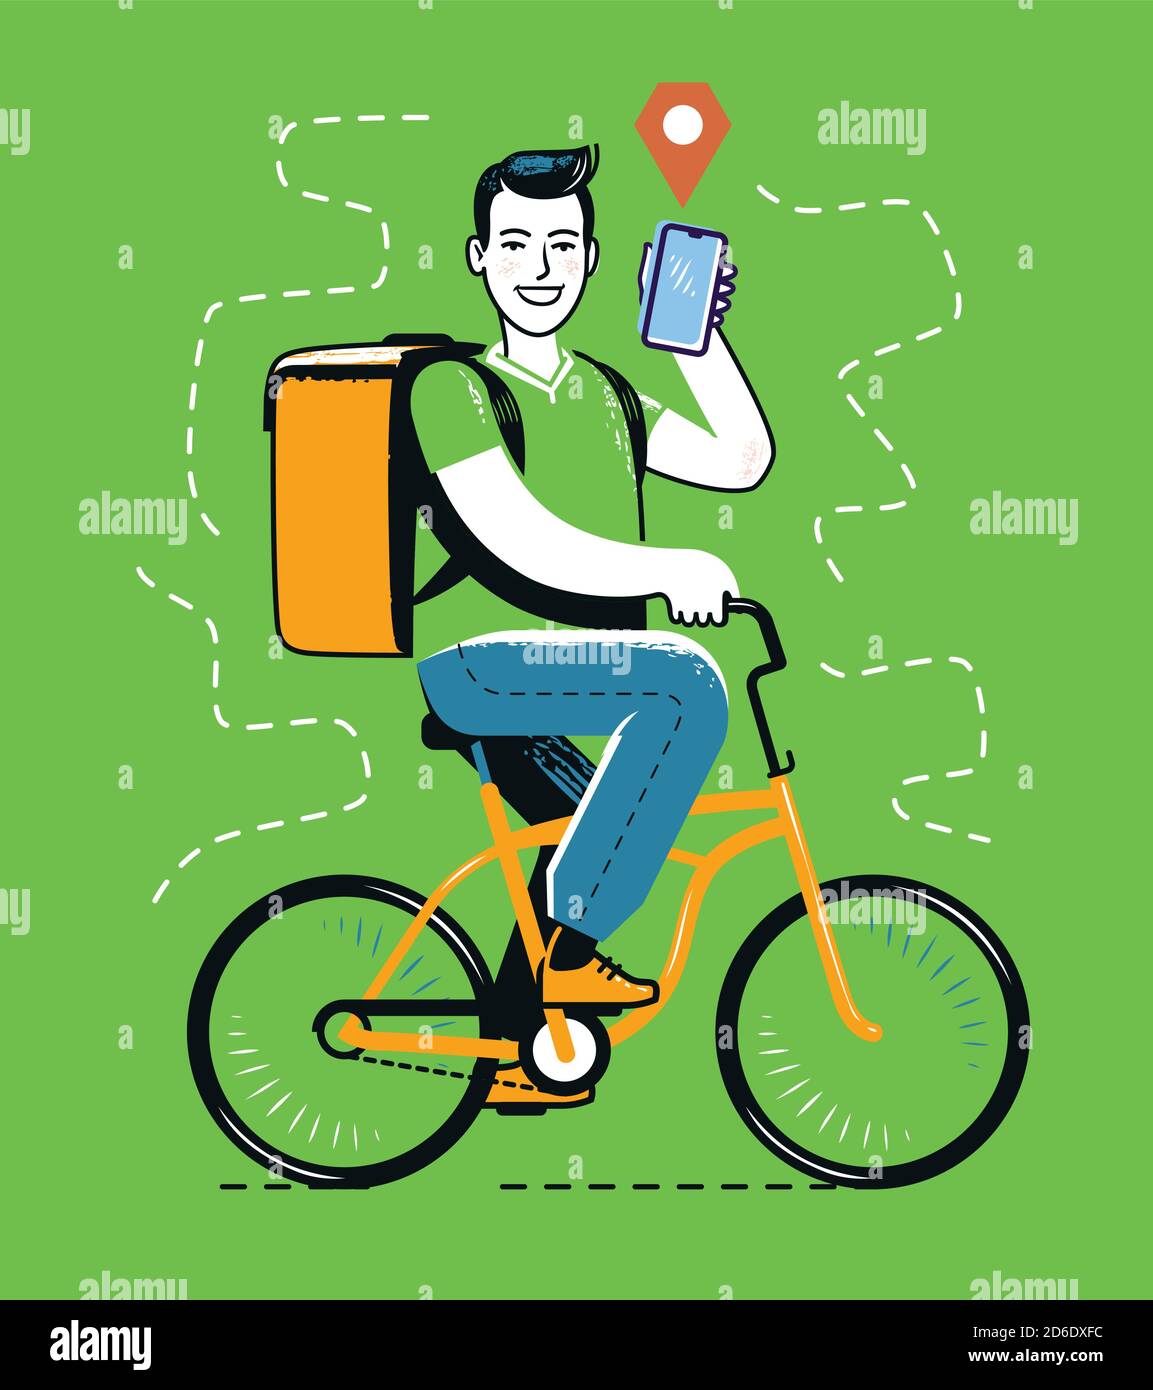 Bike riding. Cycling, travel concept vector illustration Stock Vector